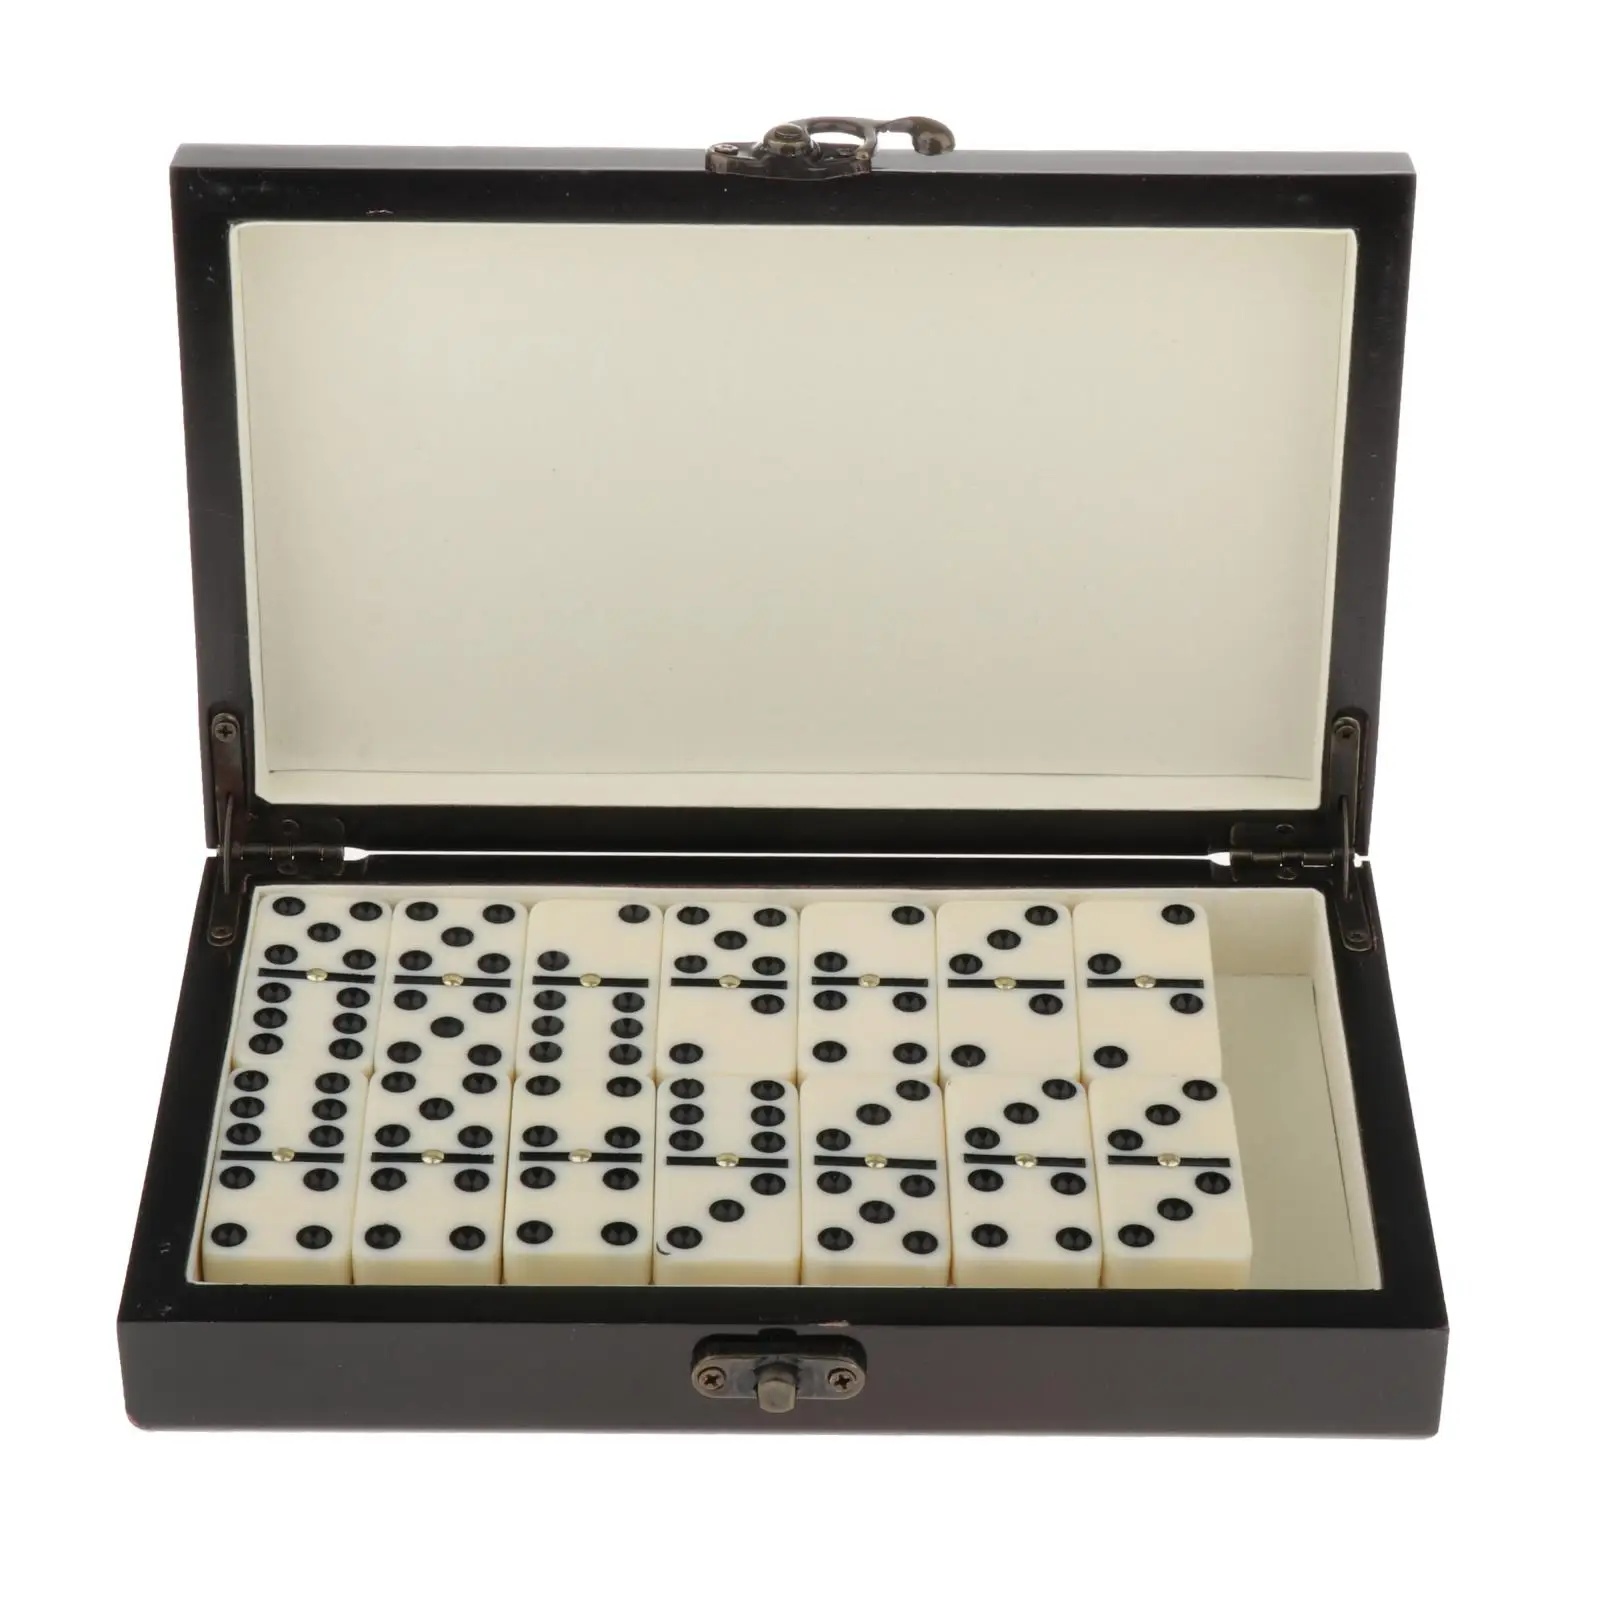 Premium Domino Set with Wooden Carrying Case, Professional Travel Tournament Domino